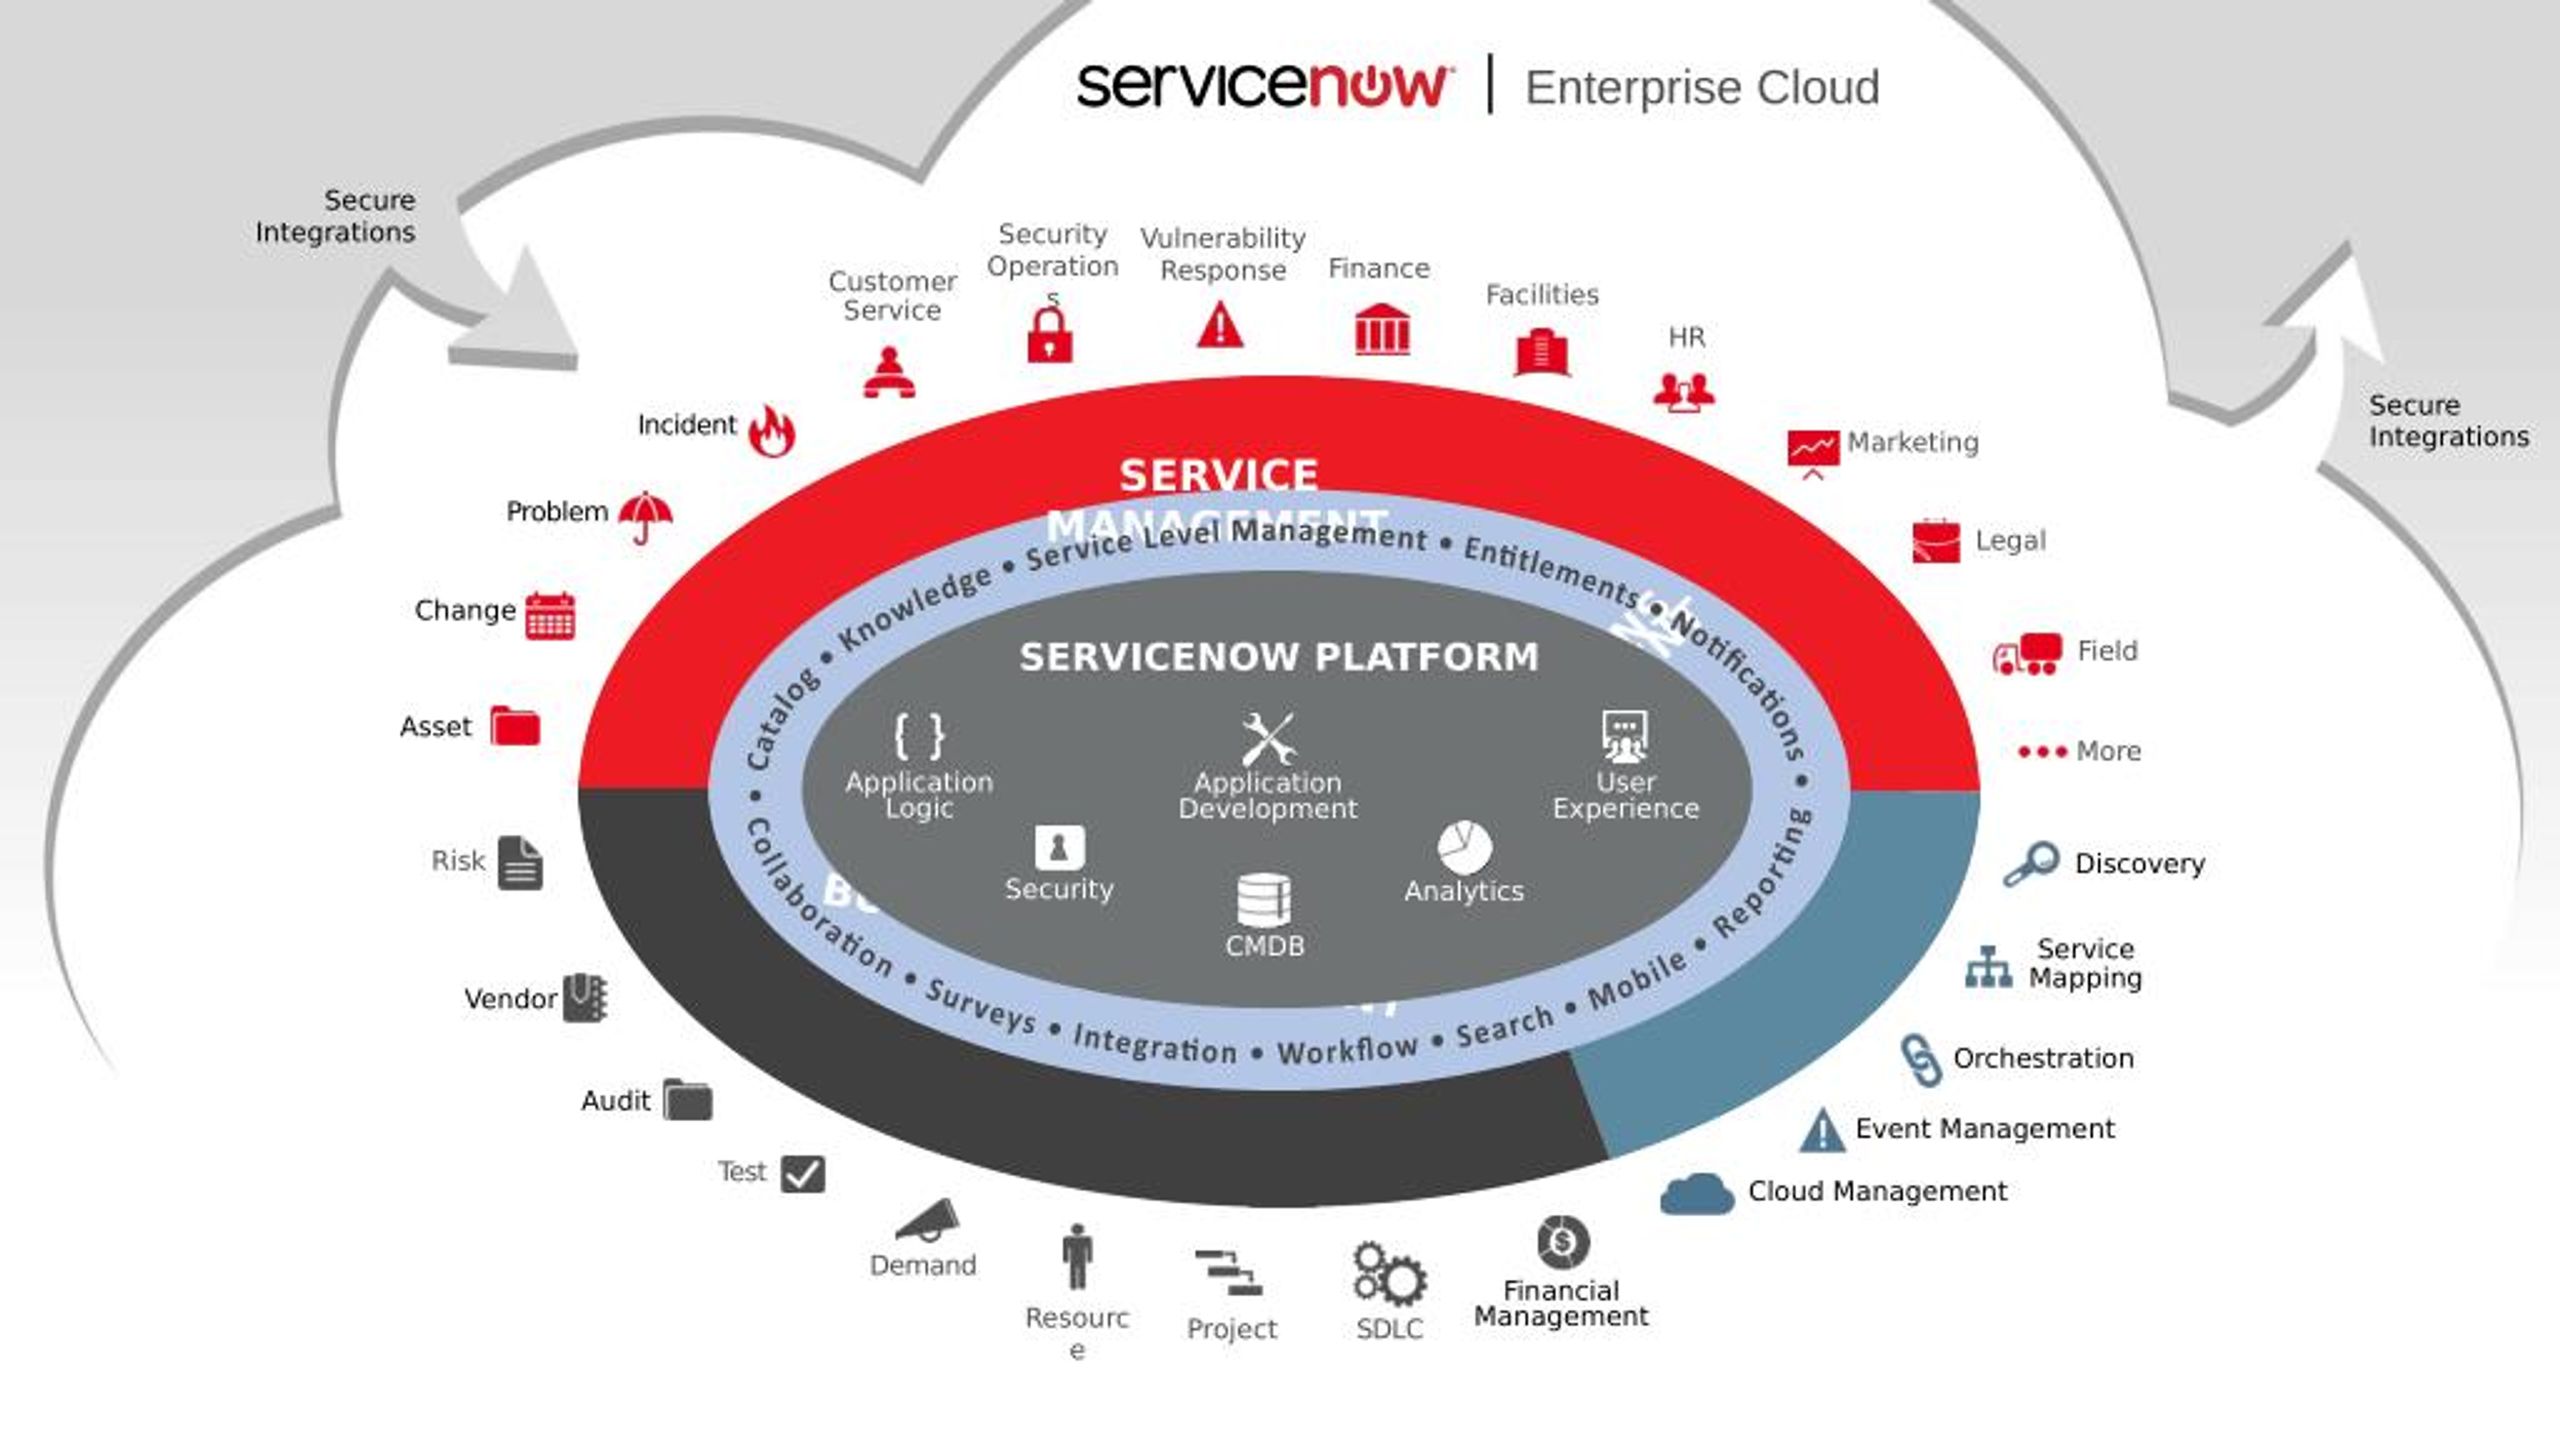 PPT Servicenow Overview PowerPoint Presentation, free download ID7516395